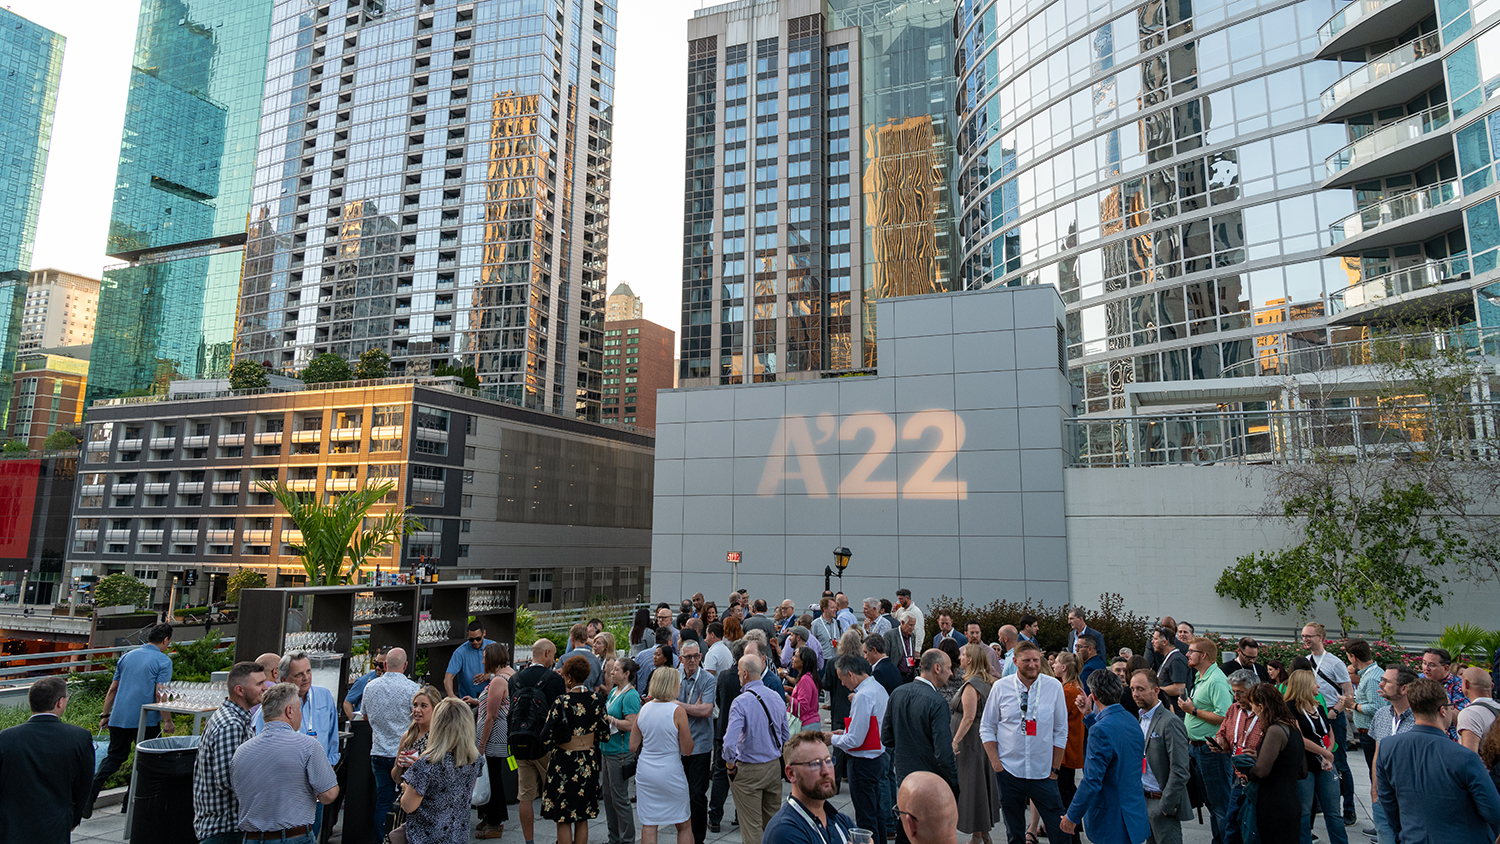 After a two-year hiatus, the 2022 AIA Conference on Architecture returned last week, bringing thousands of architects to Chicago. Photo: Courtesy of AIA.